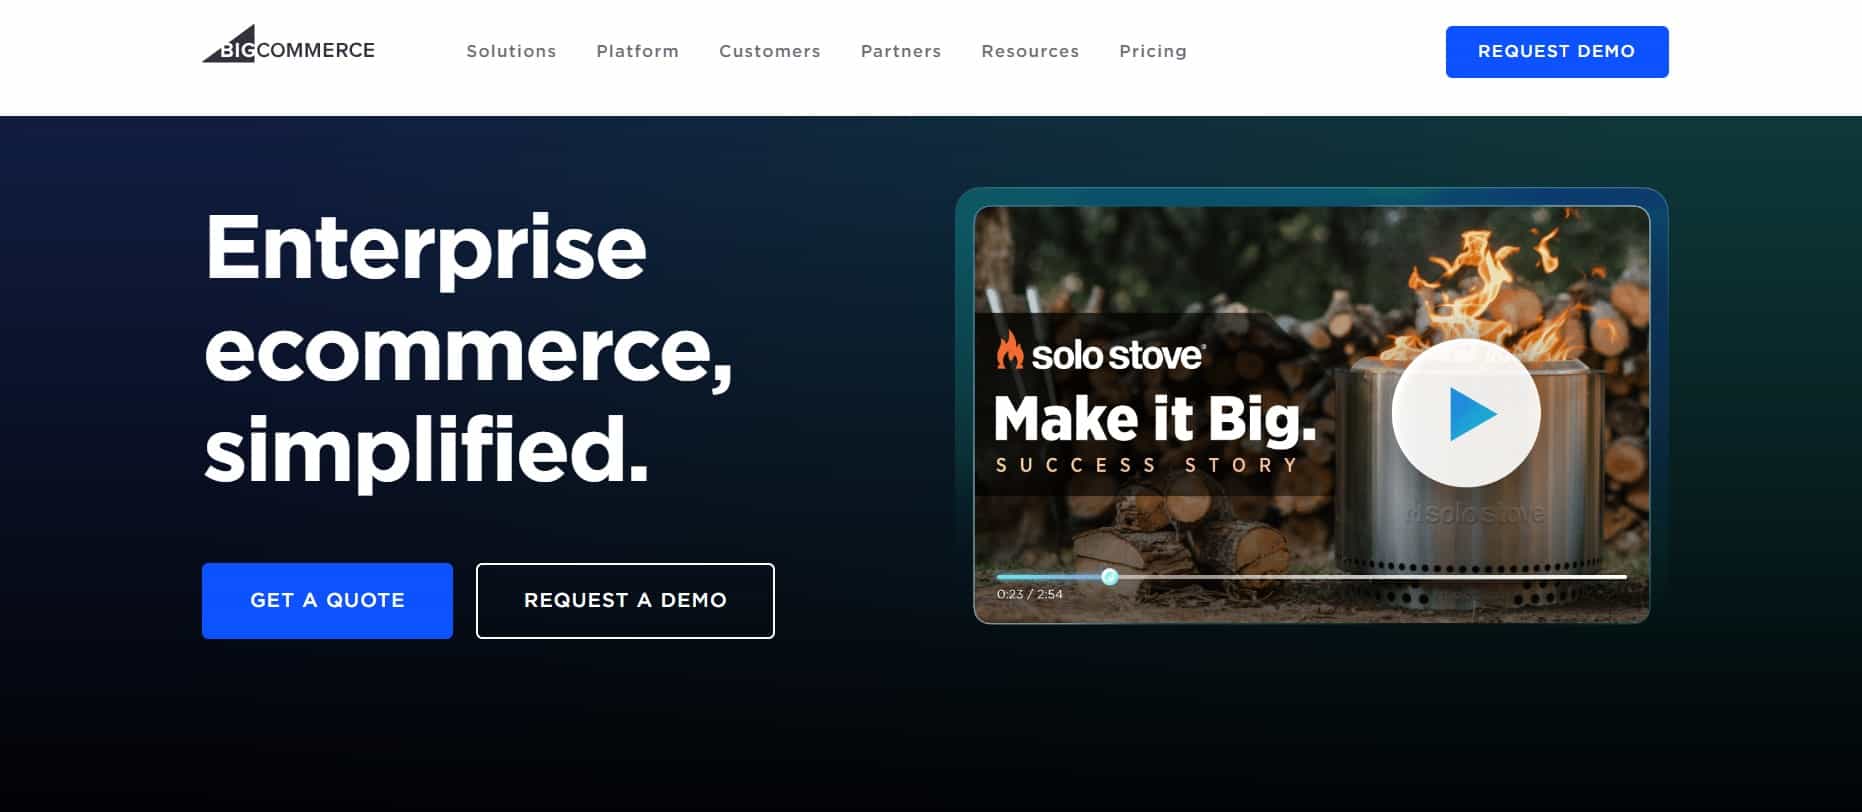 bigcommerce Home Page